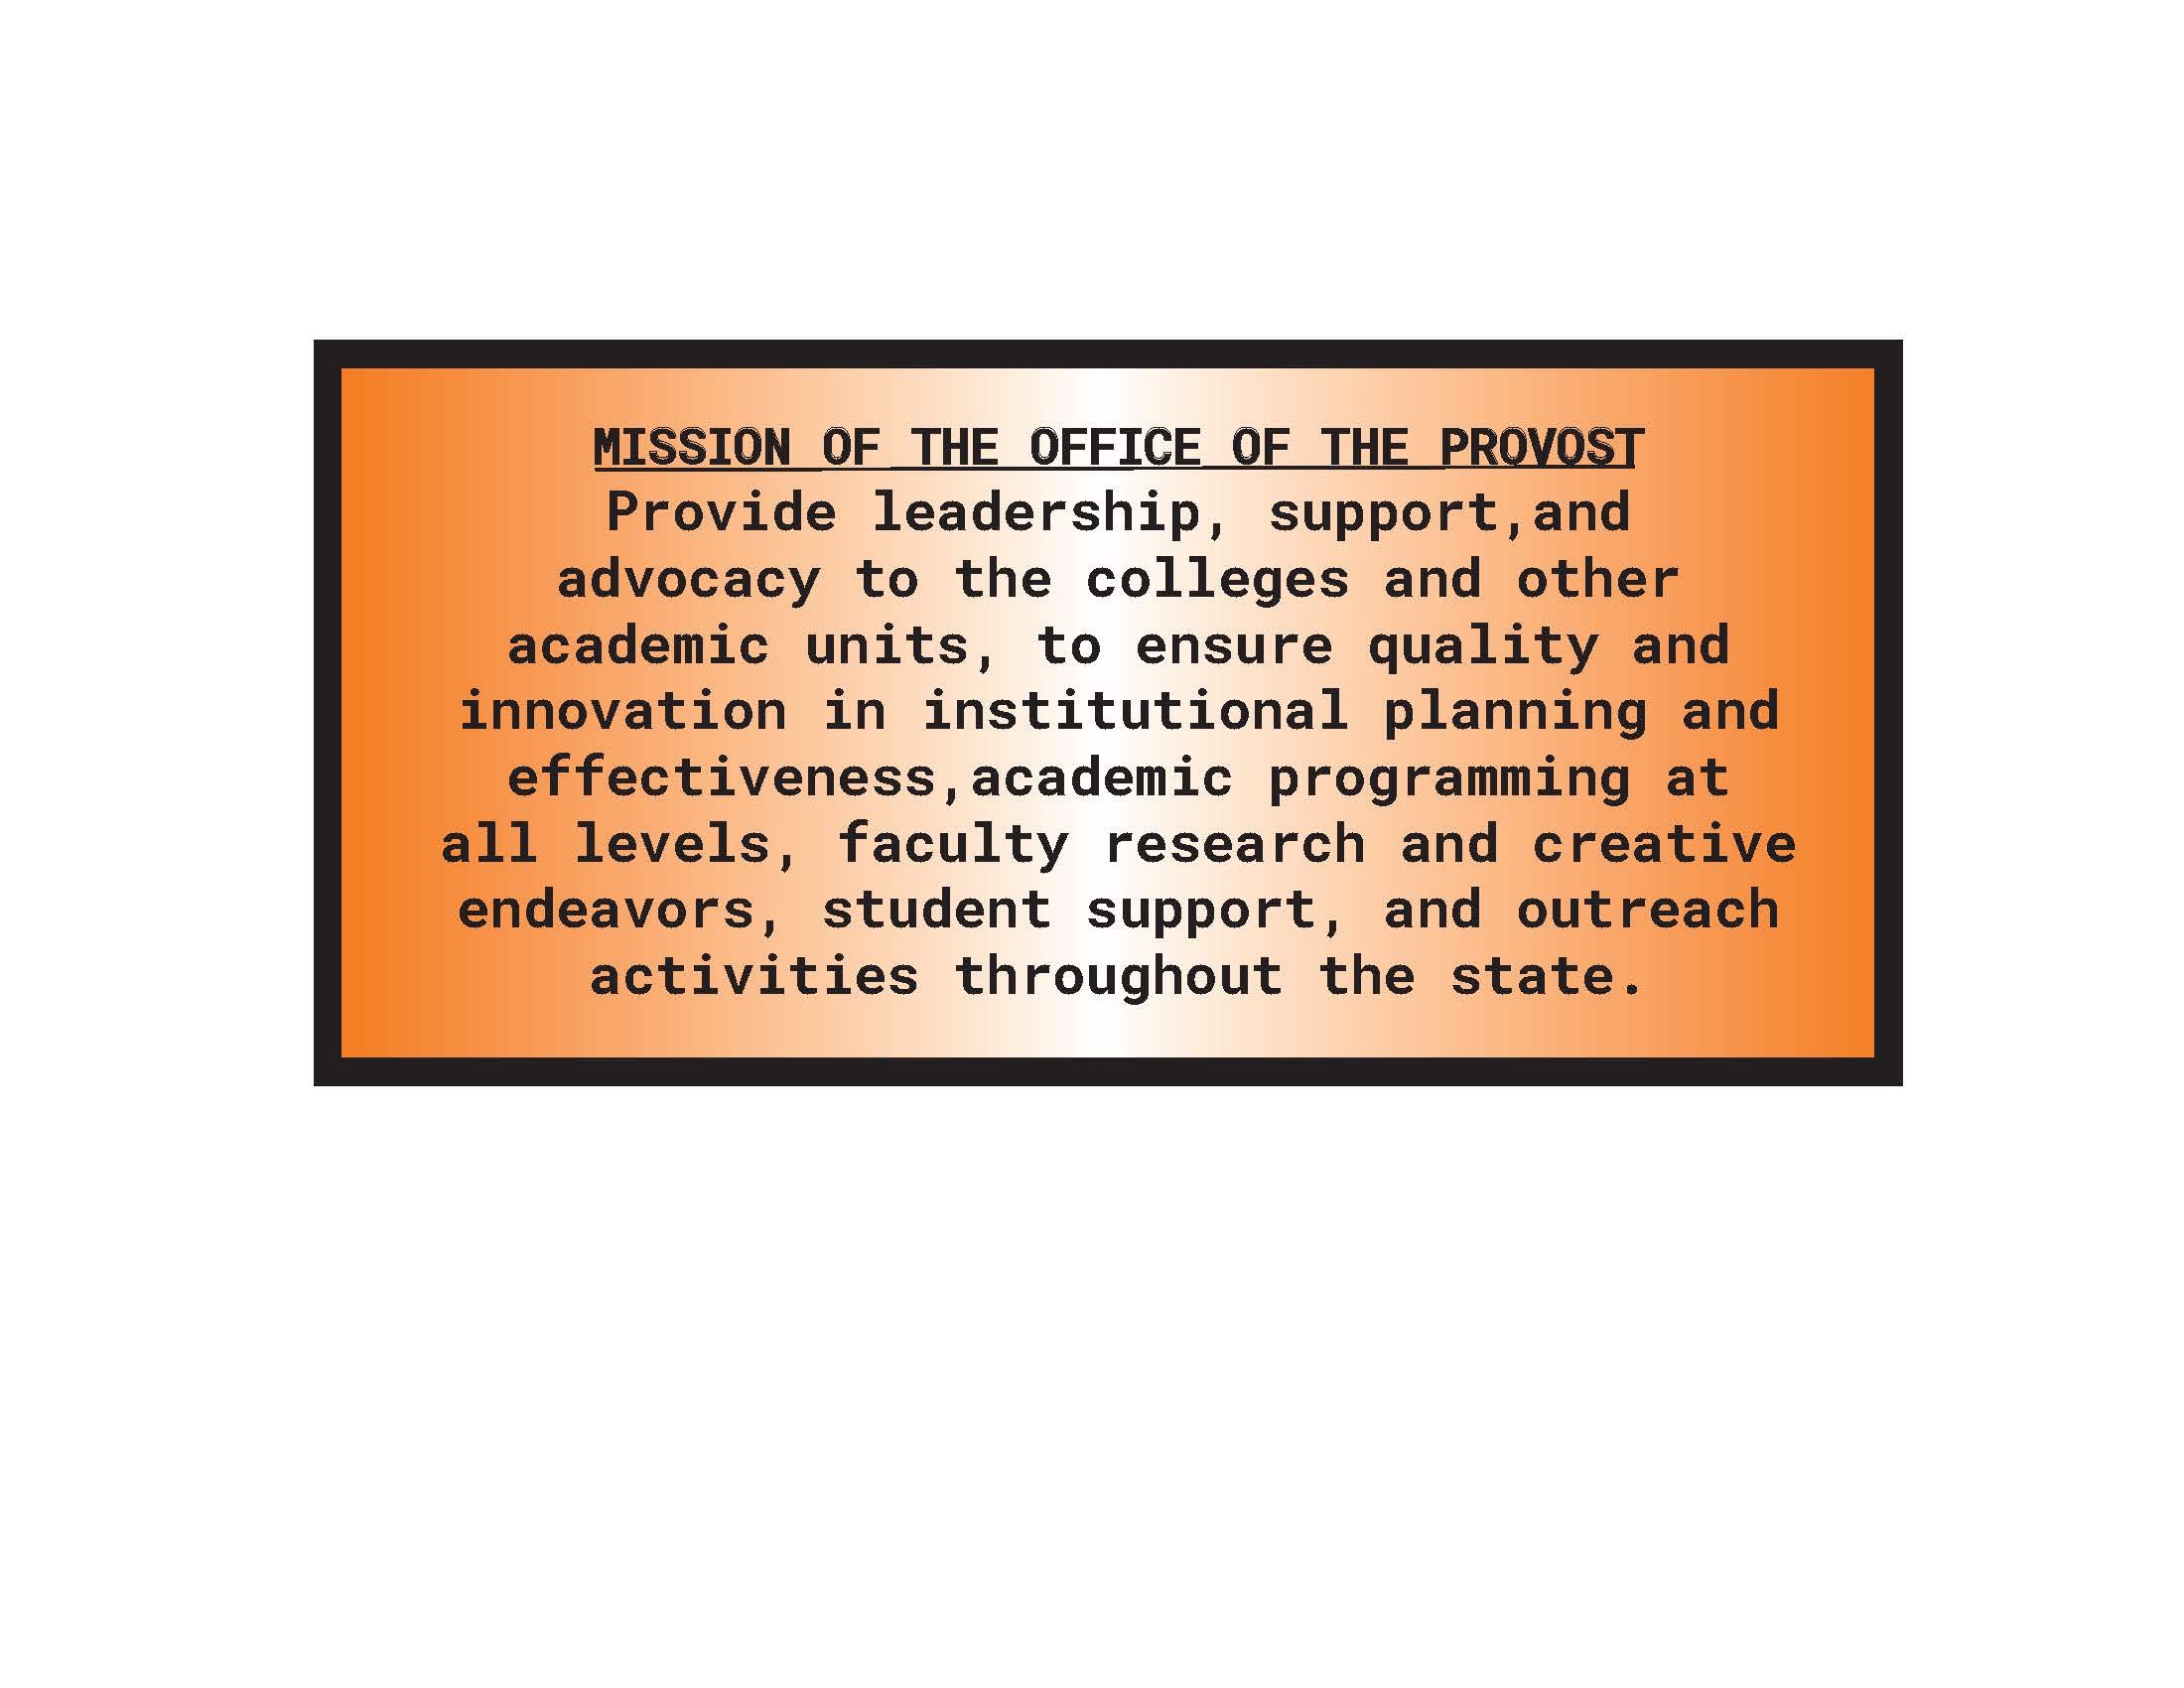 JPEG mission of the office of the provost